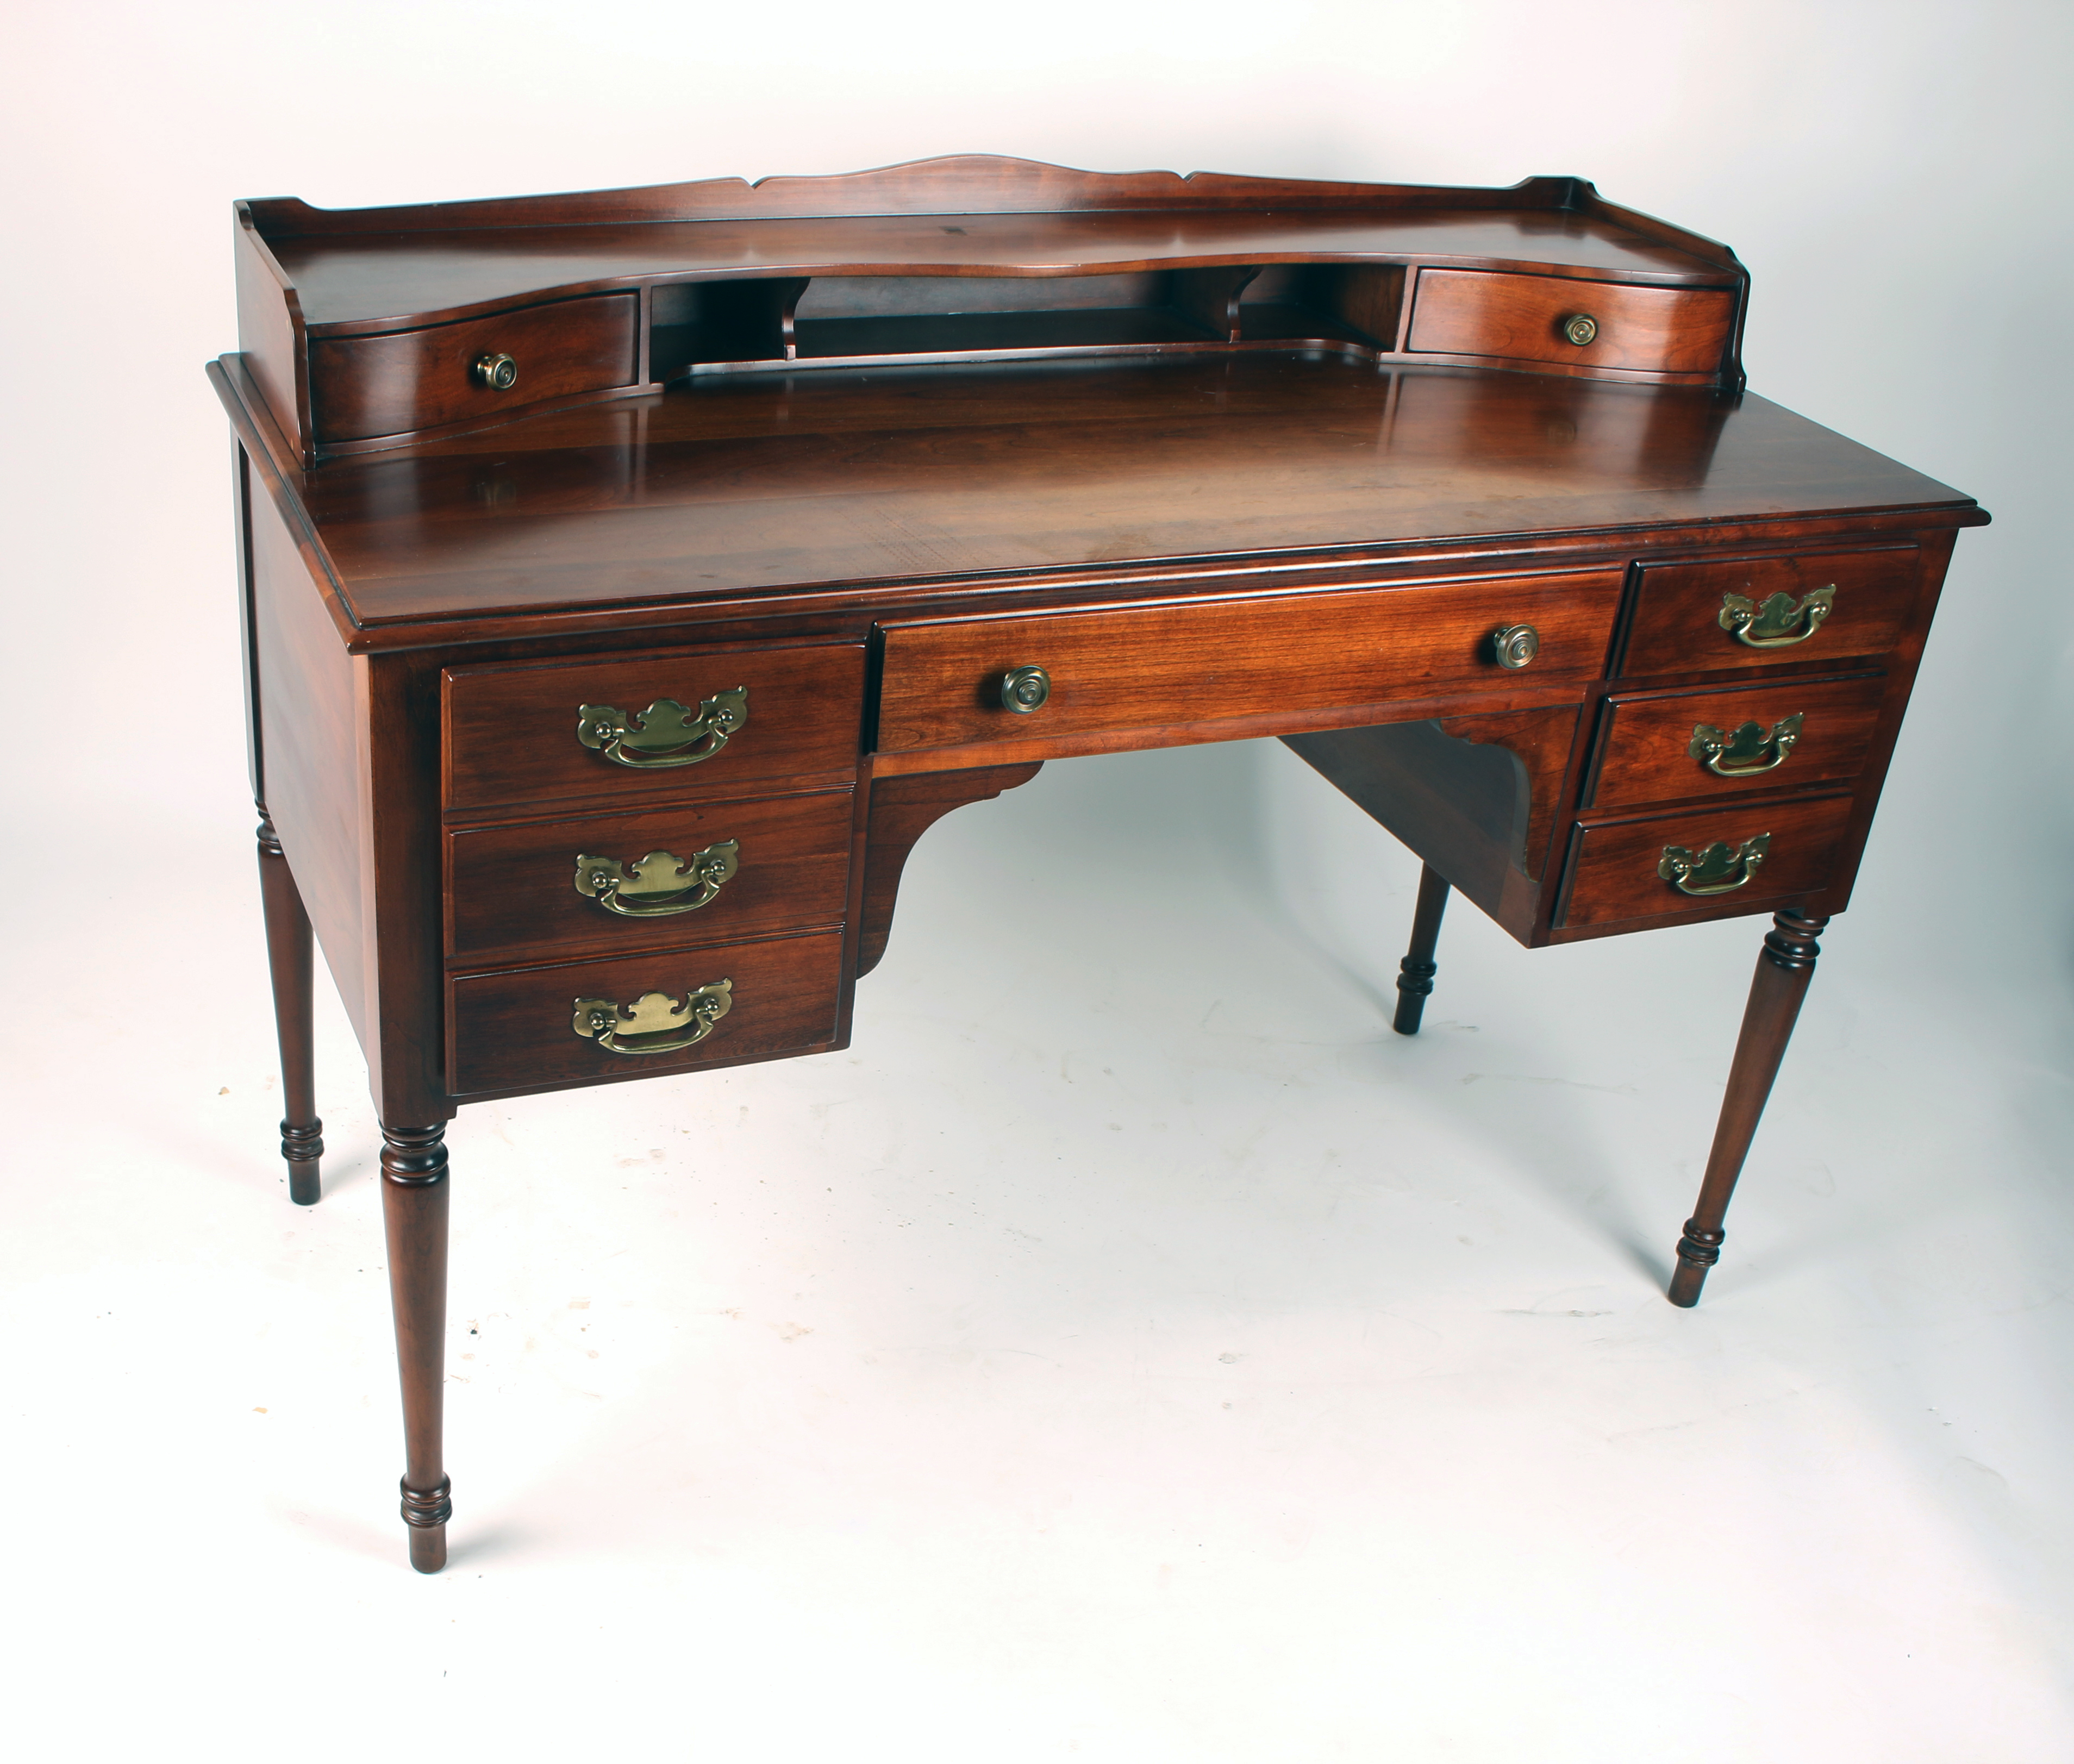 Elegant 1973 Old Towne Cherry Wood Desk With Brass Accents image 3